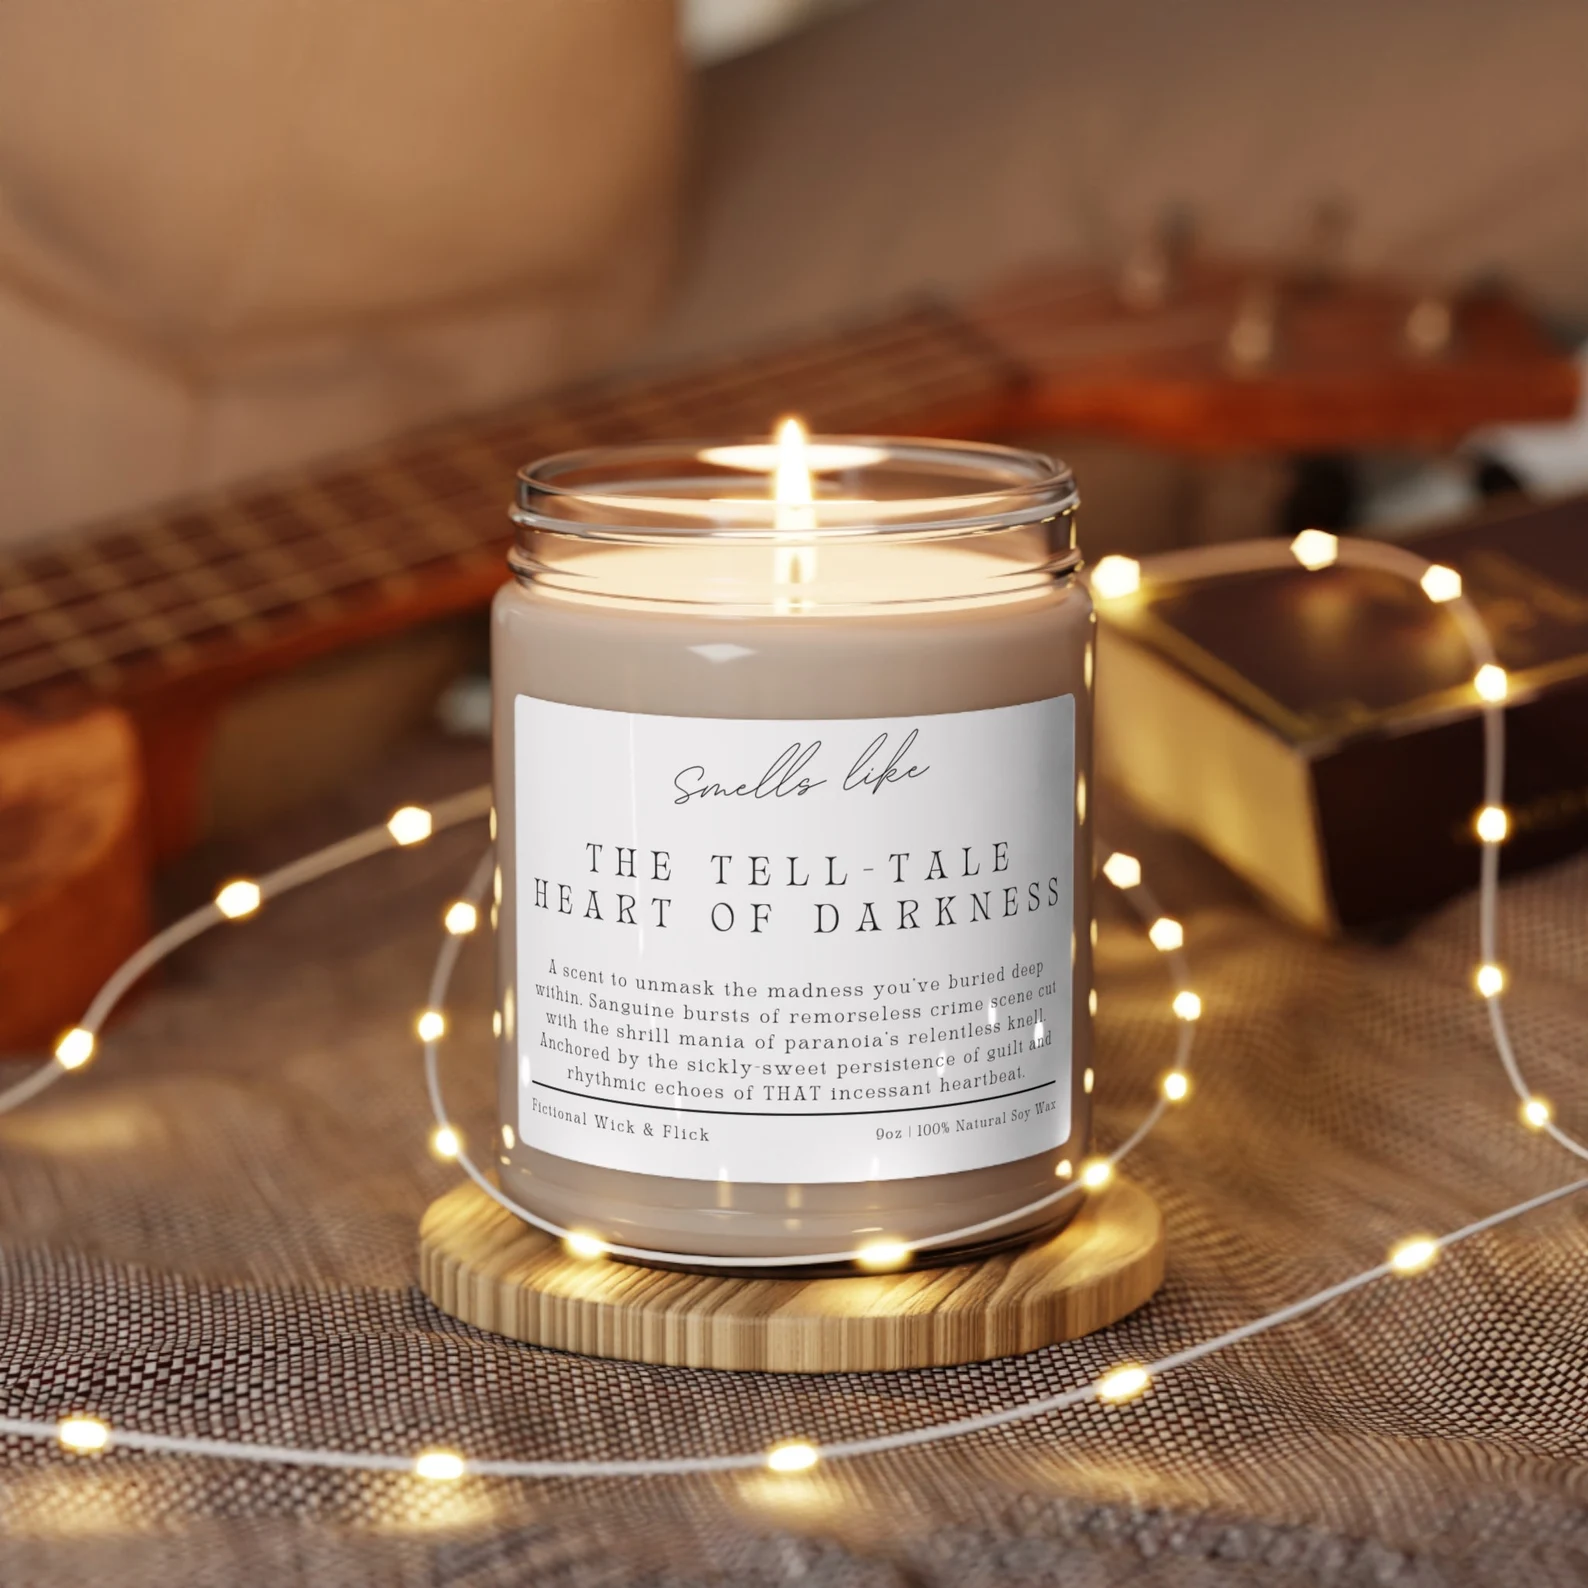 image of a candle called "the tell-tale heart of darkness."